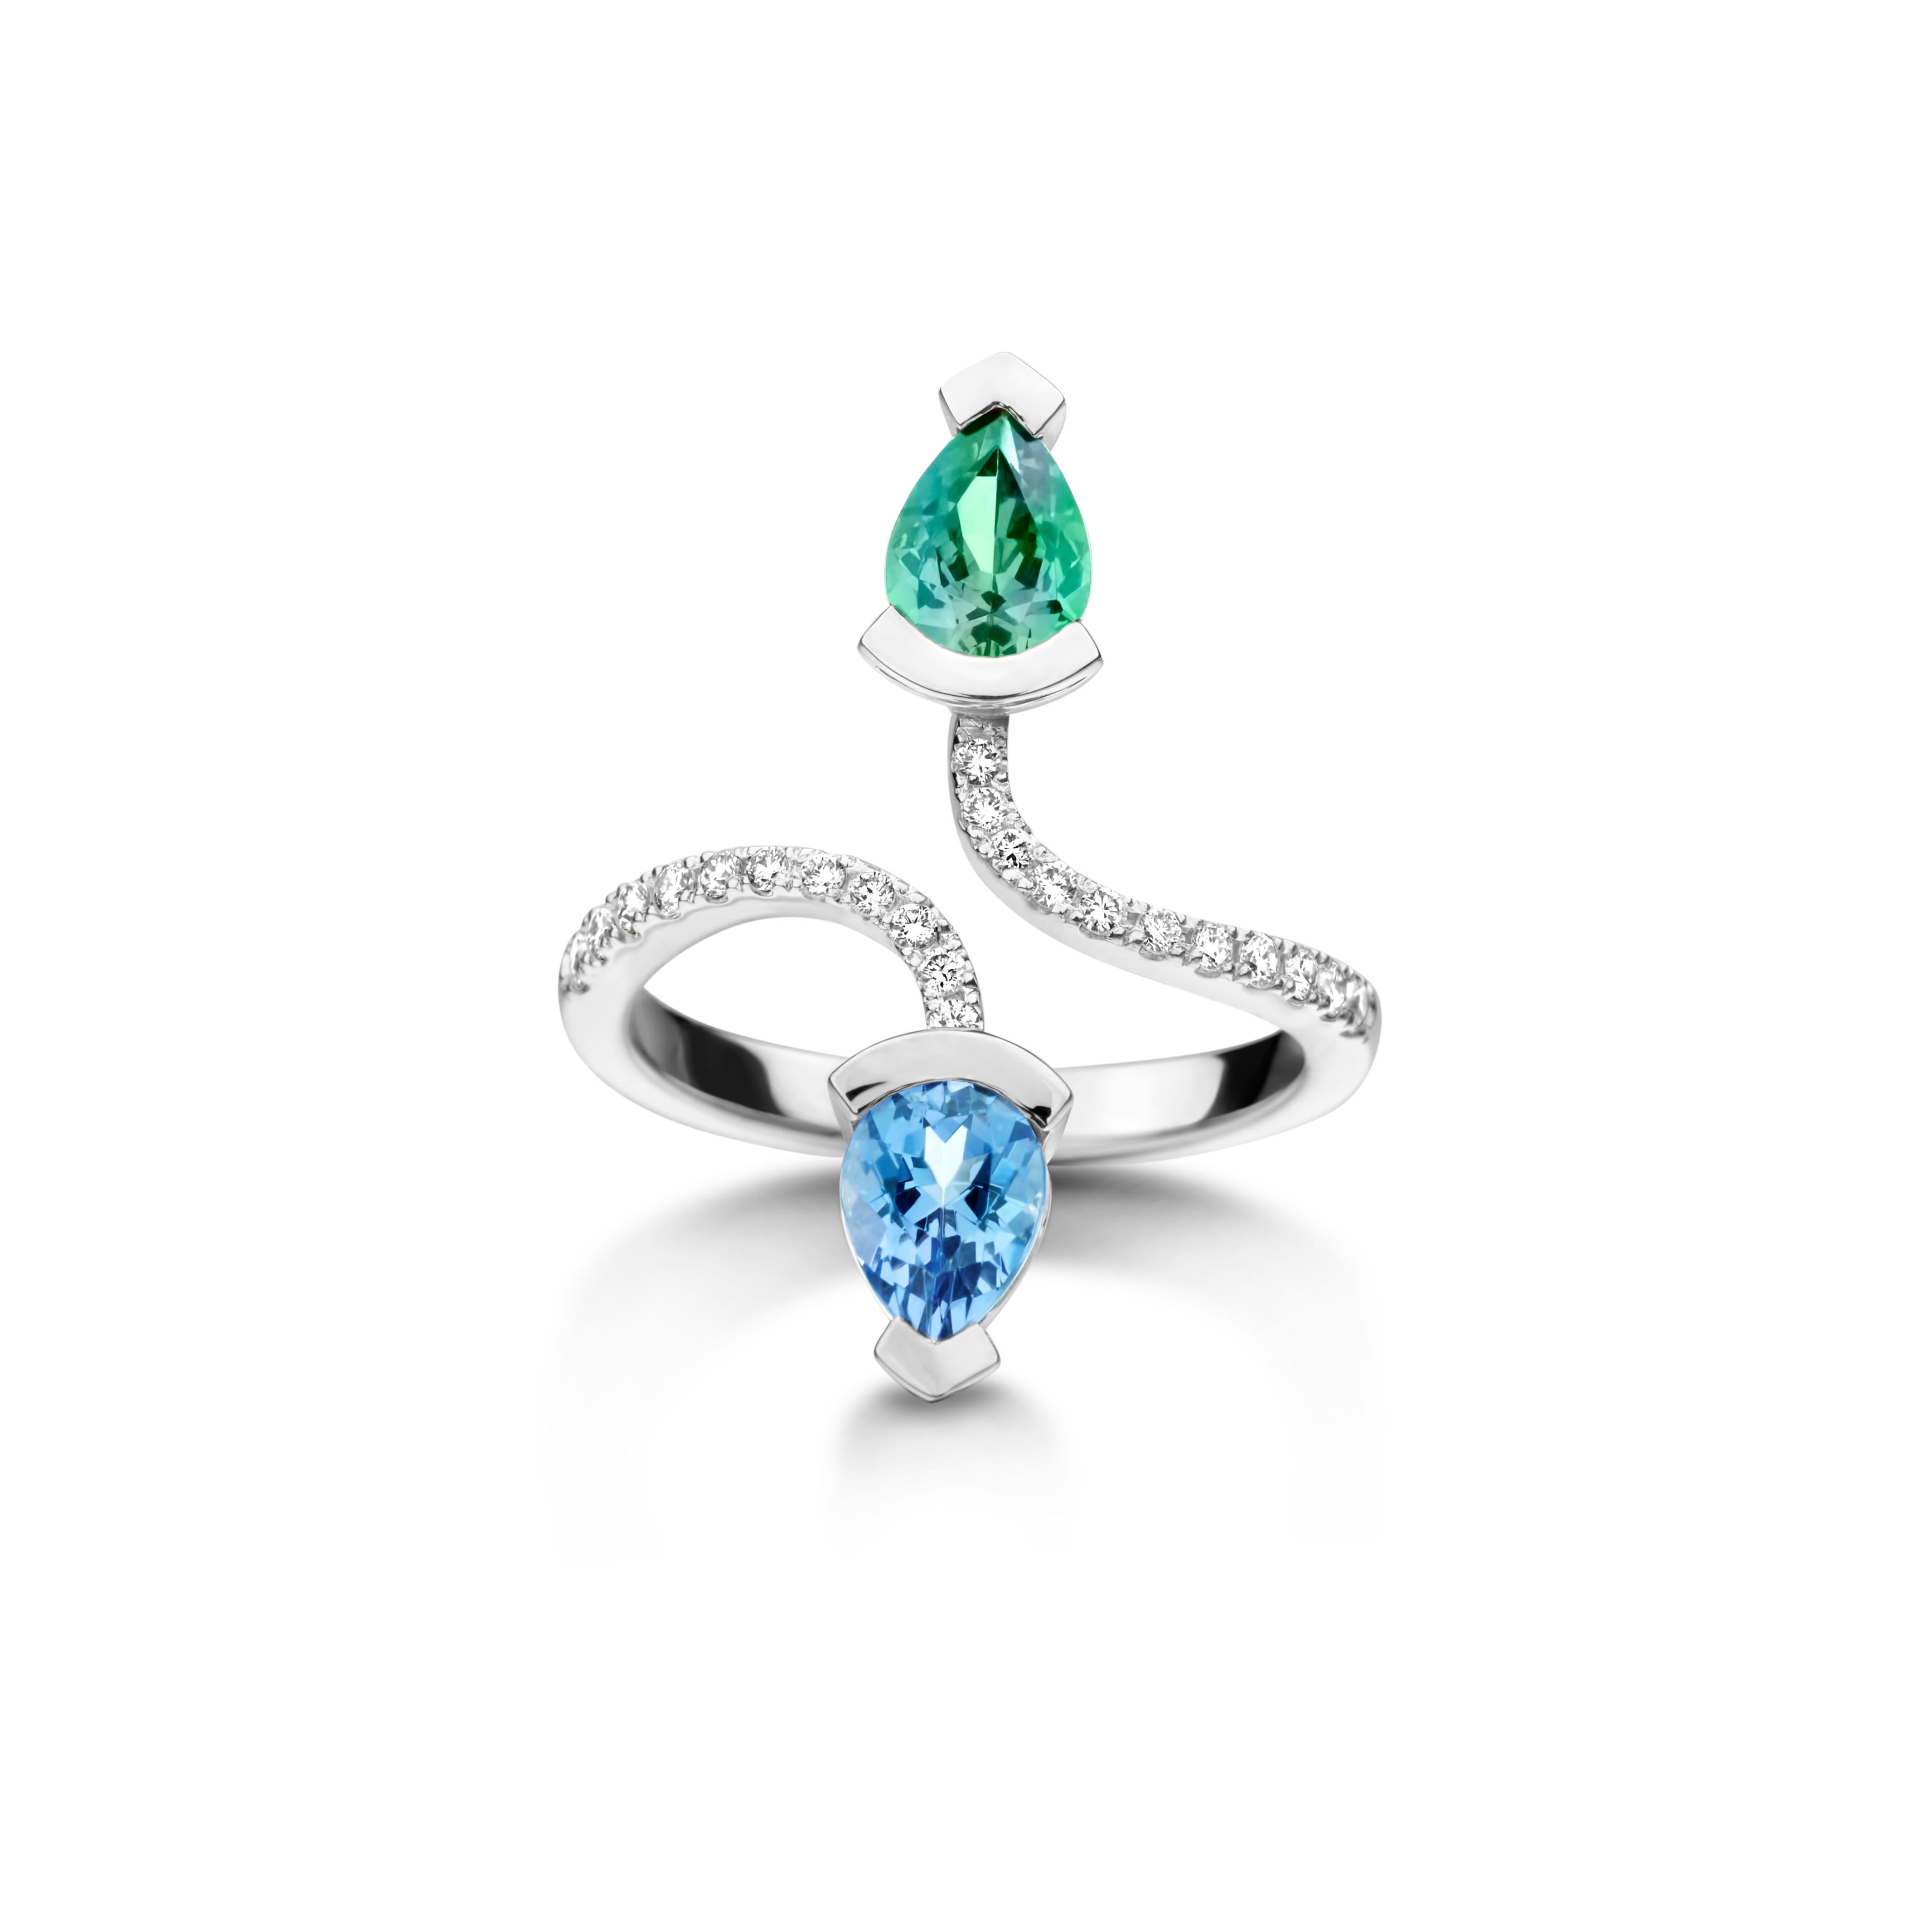 Contemporary 0.70ct Mint Tourmaline & 0.79ct Aquamarine 18kt White Gold Diamond Cocktail Ring For Sale